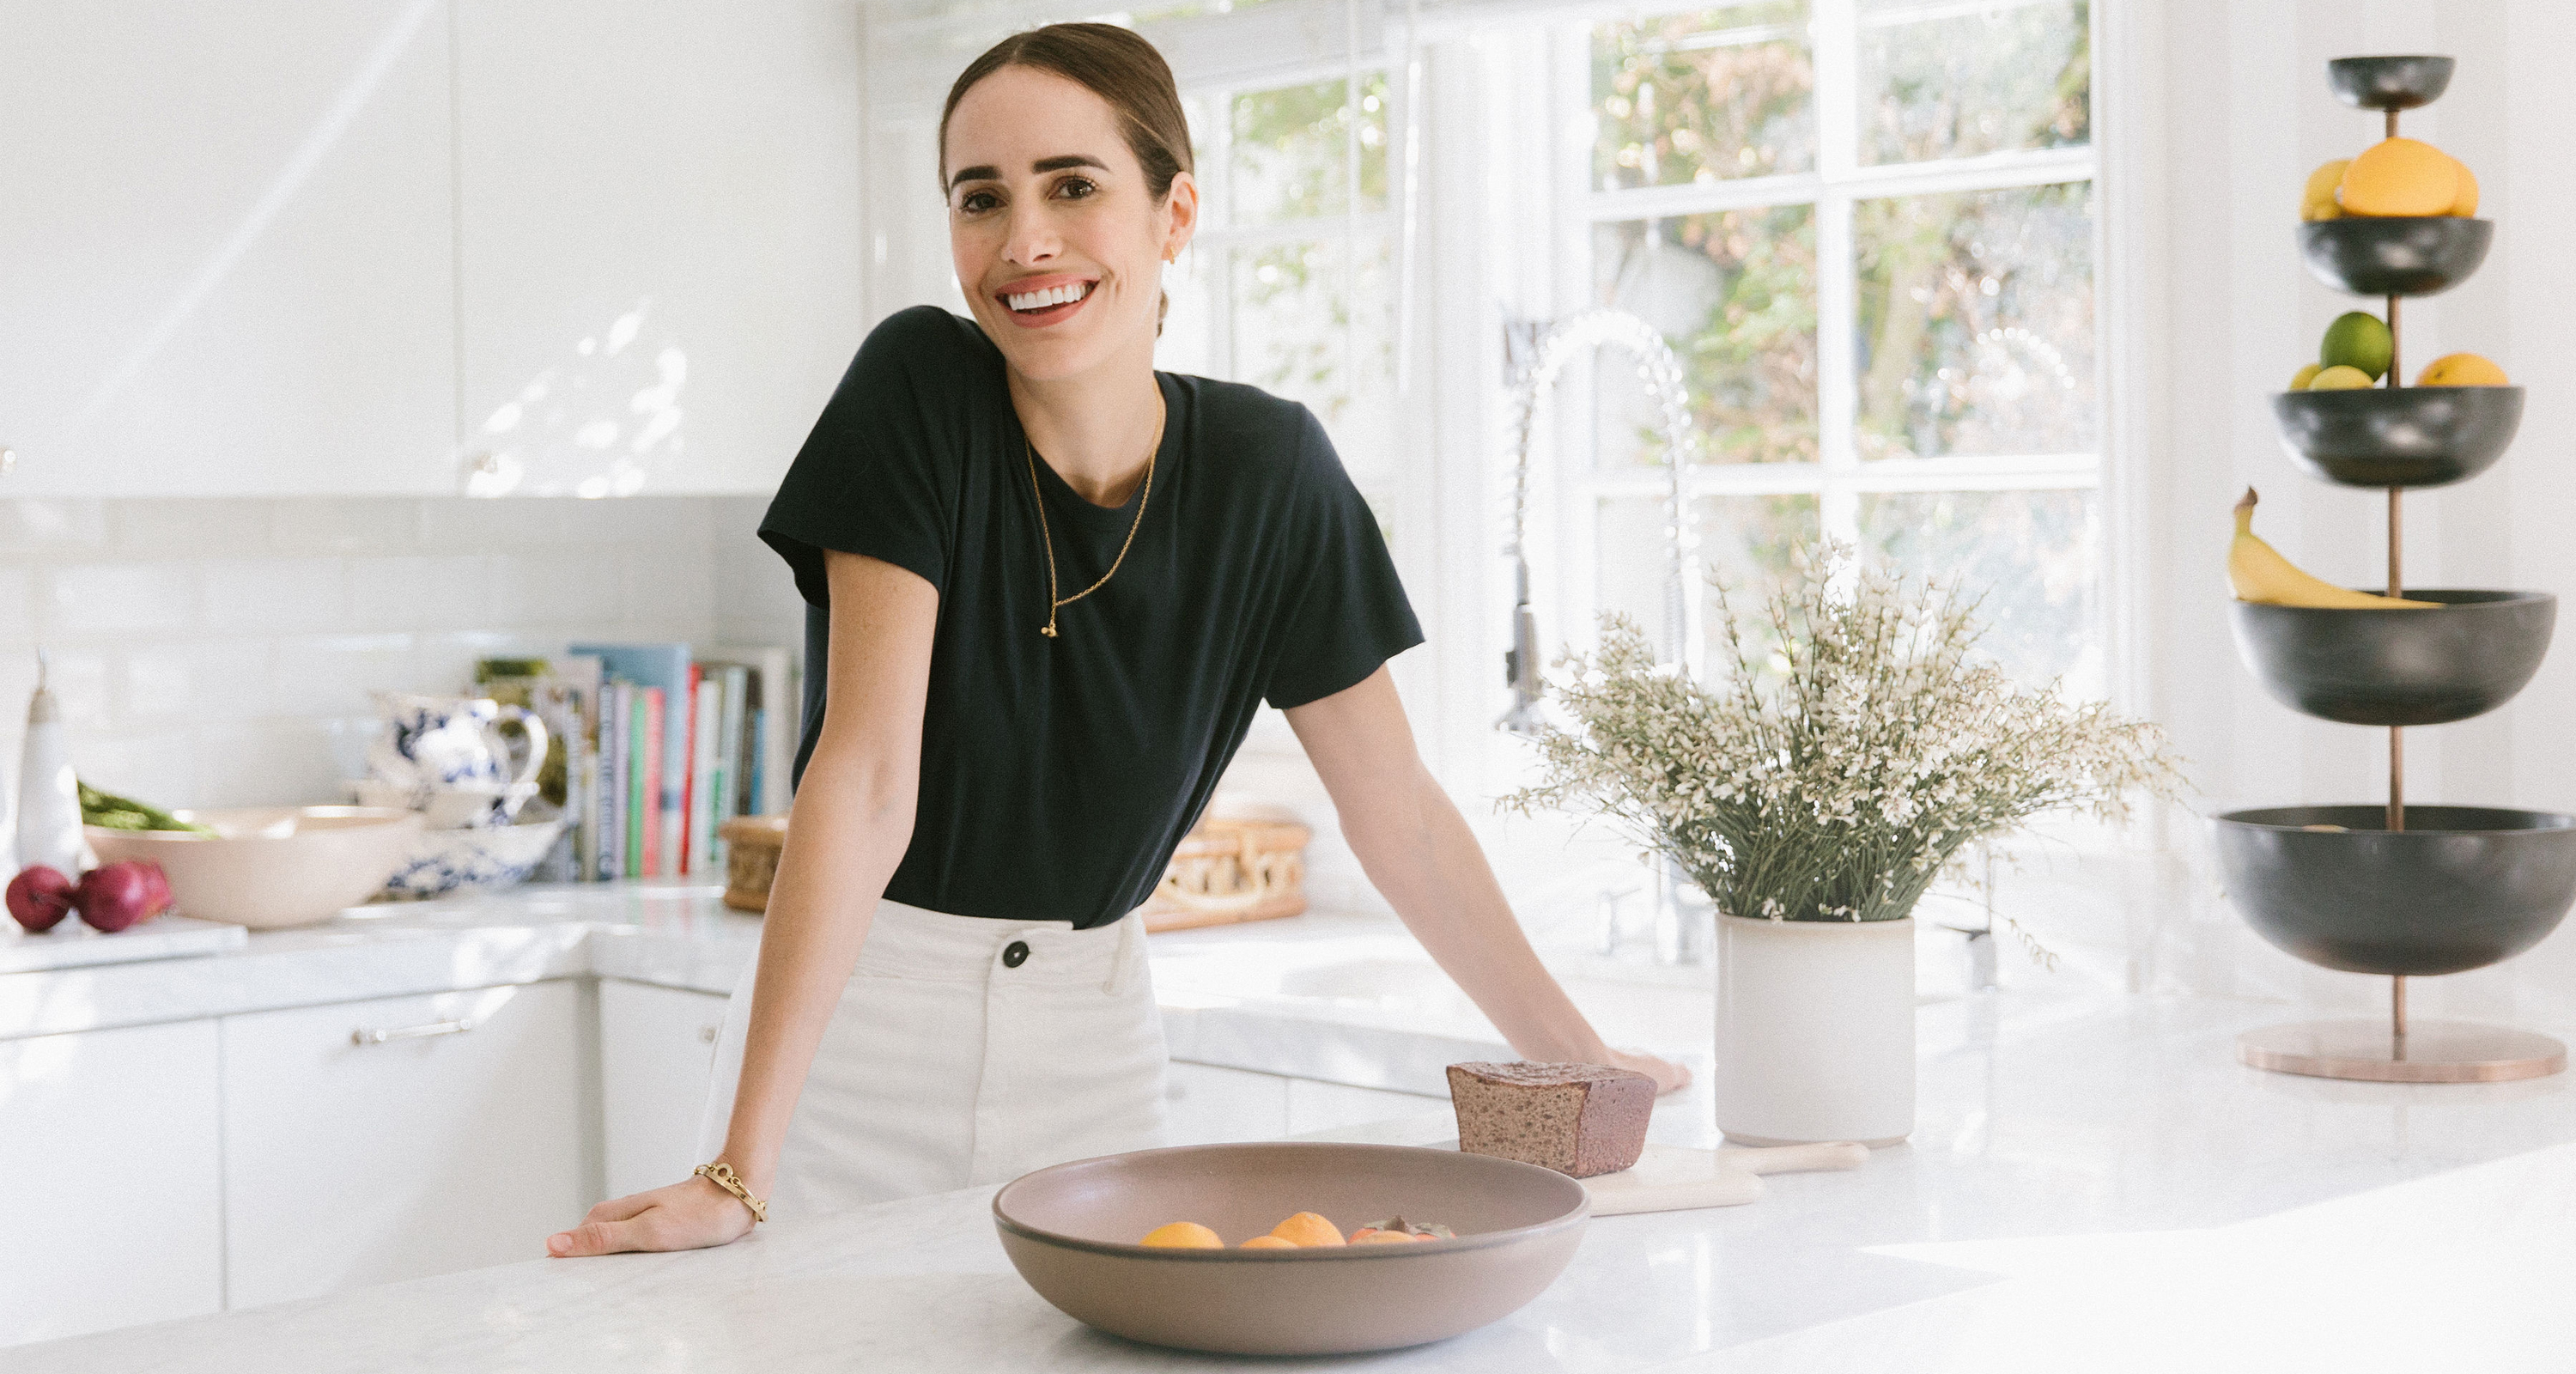 At Home with Louise Roe in the Hollywood Hills – Jenni Kayne